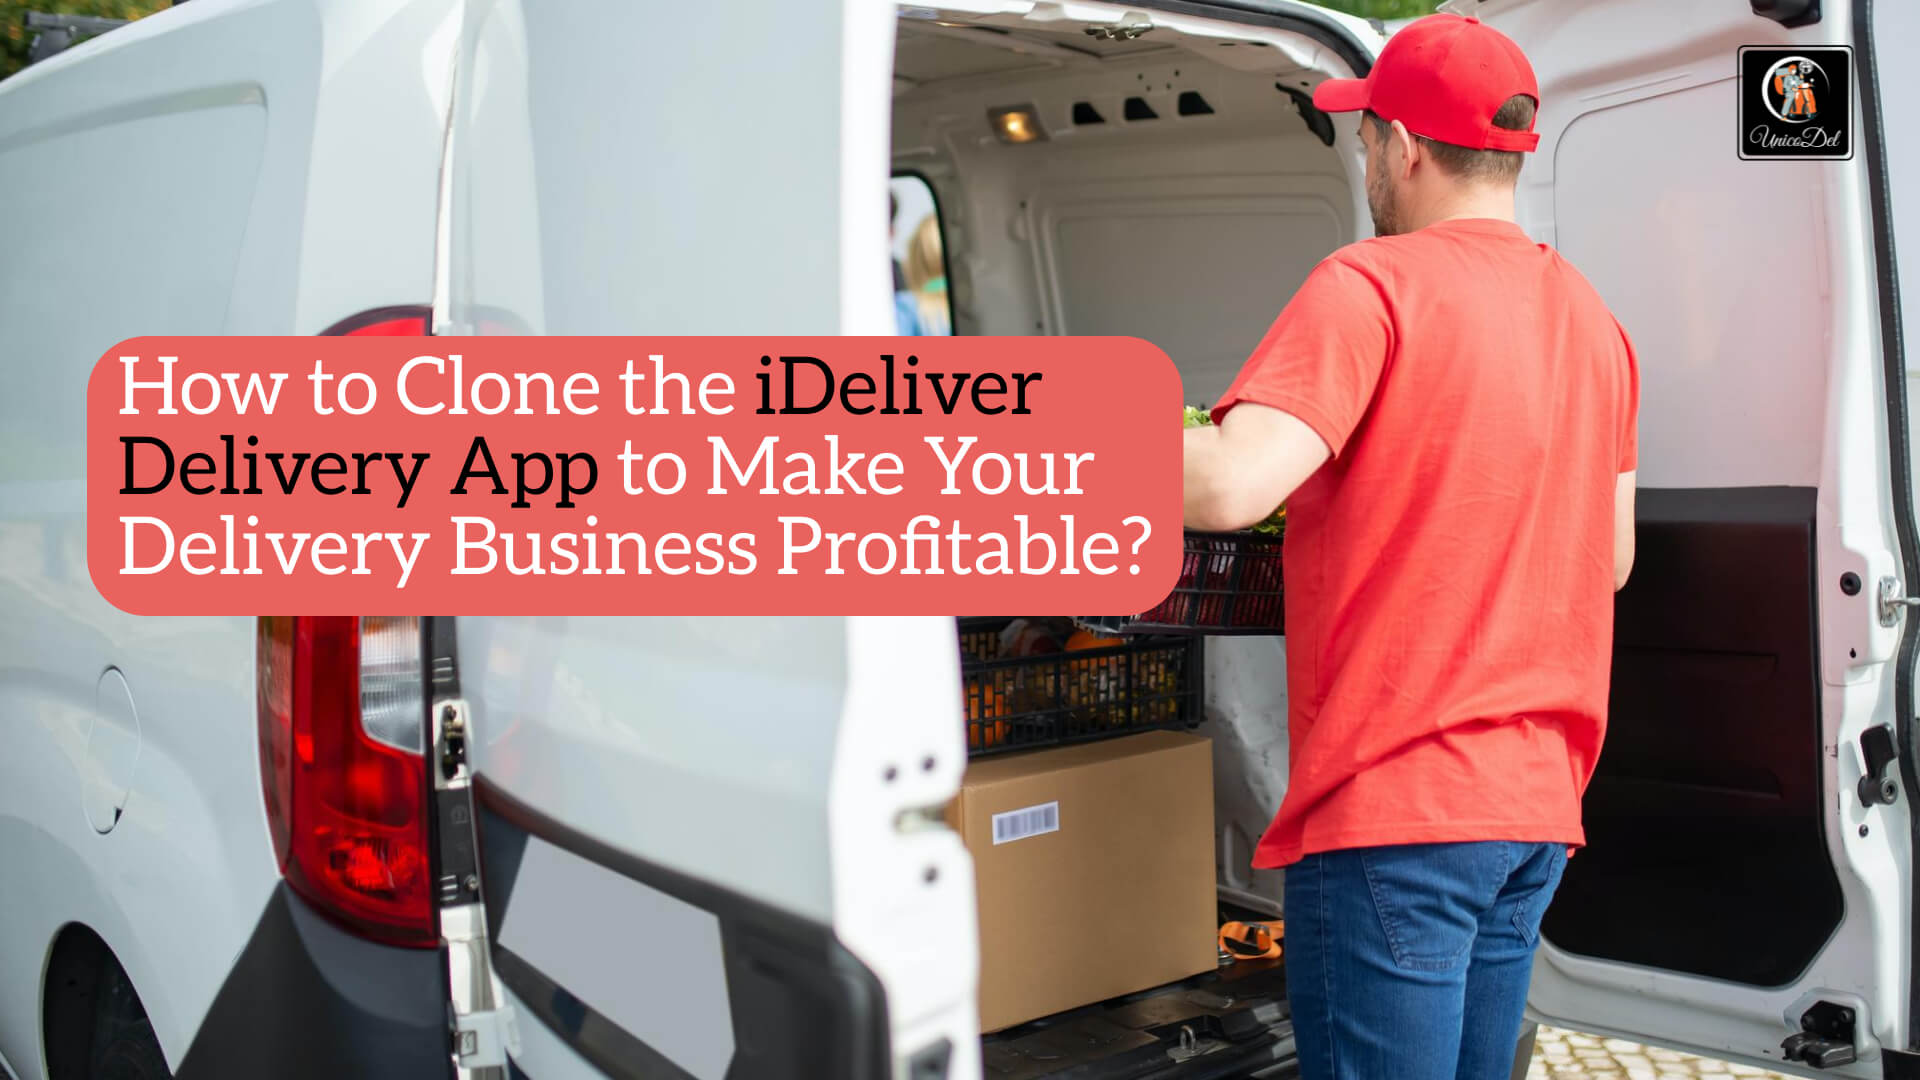 How to Clone the iDeliver Delivery App to Make Your Delivery Business Profitable?